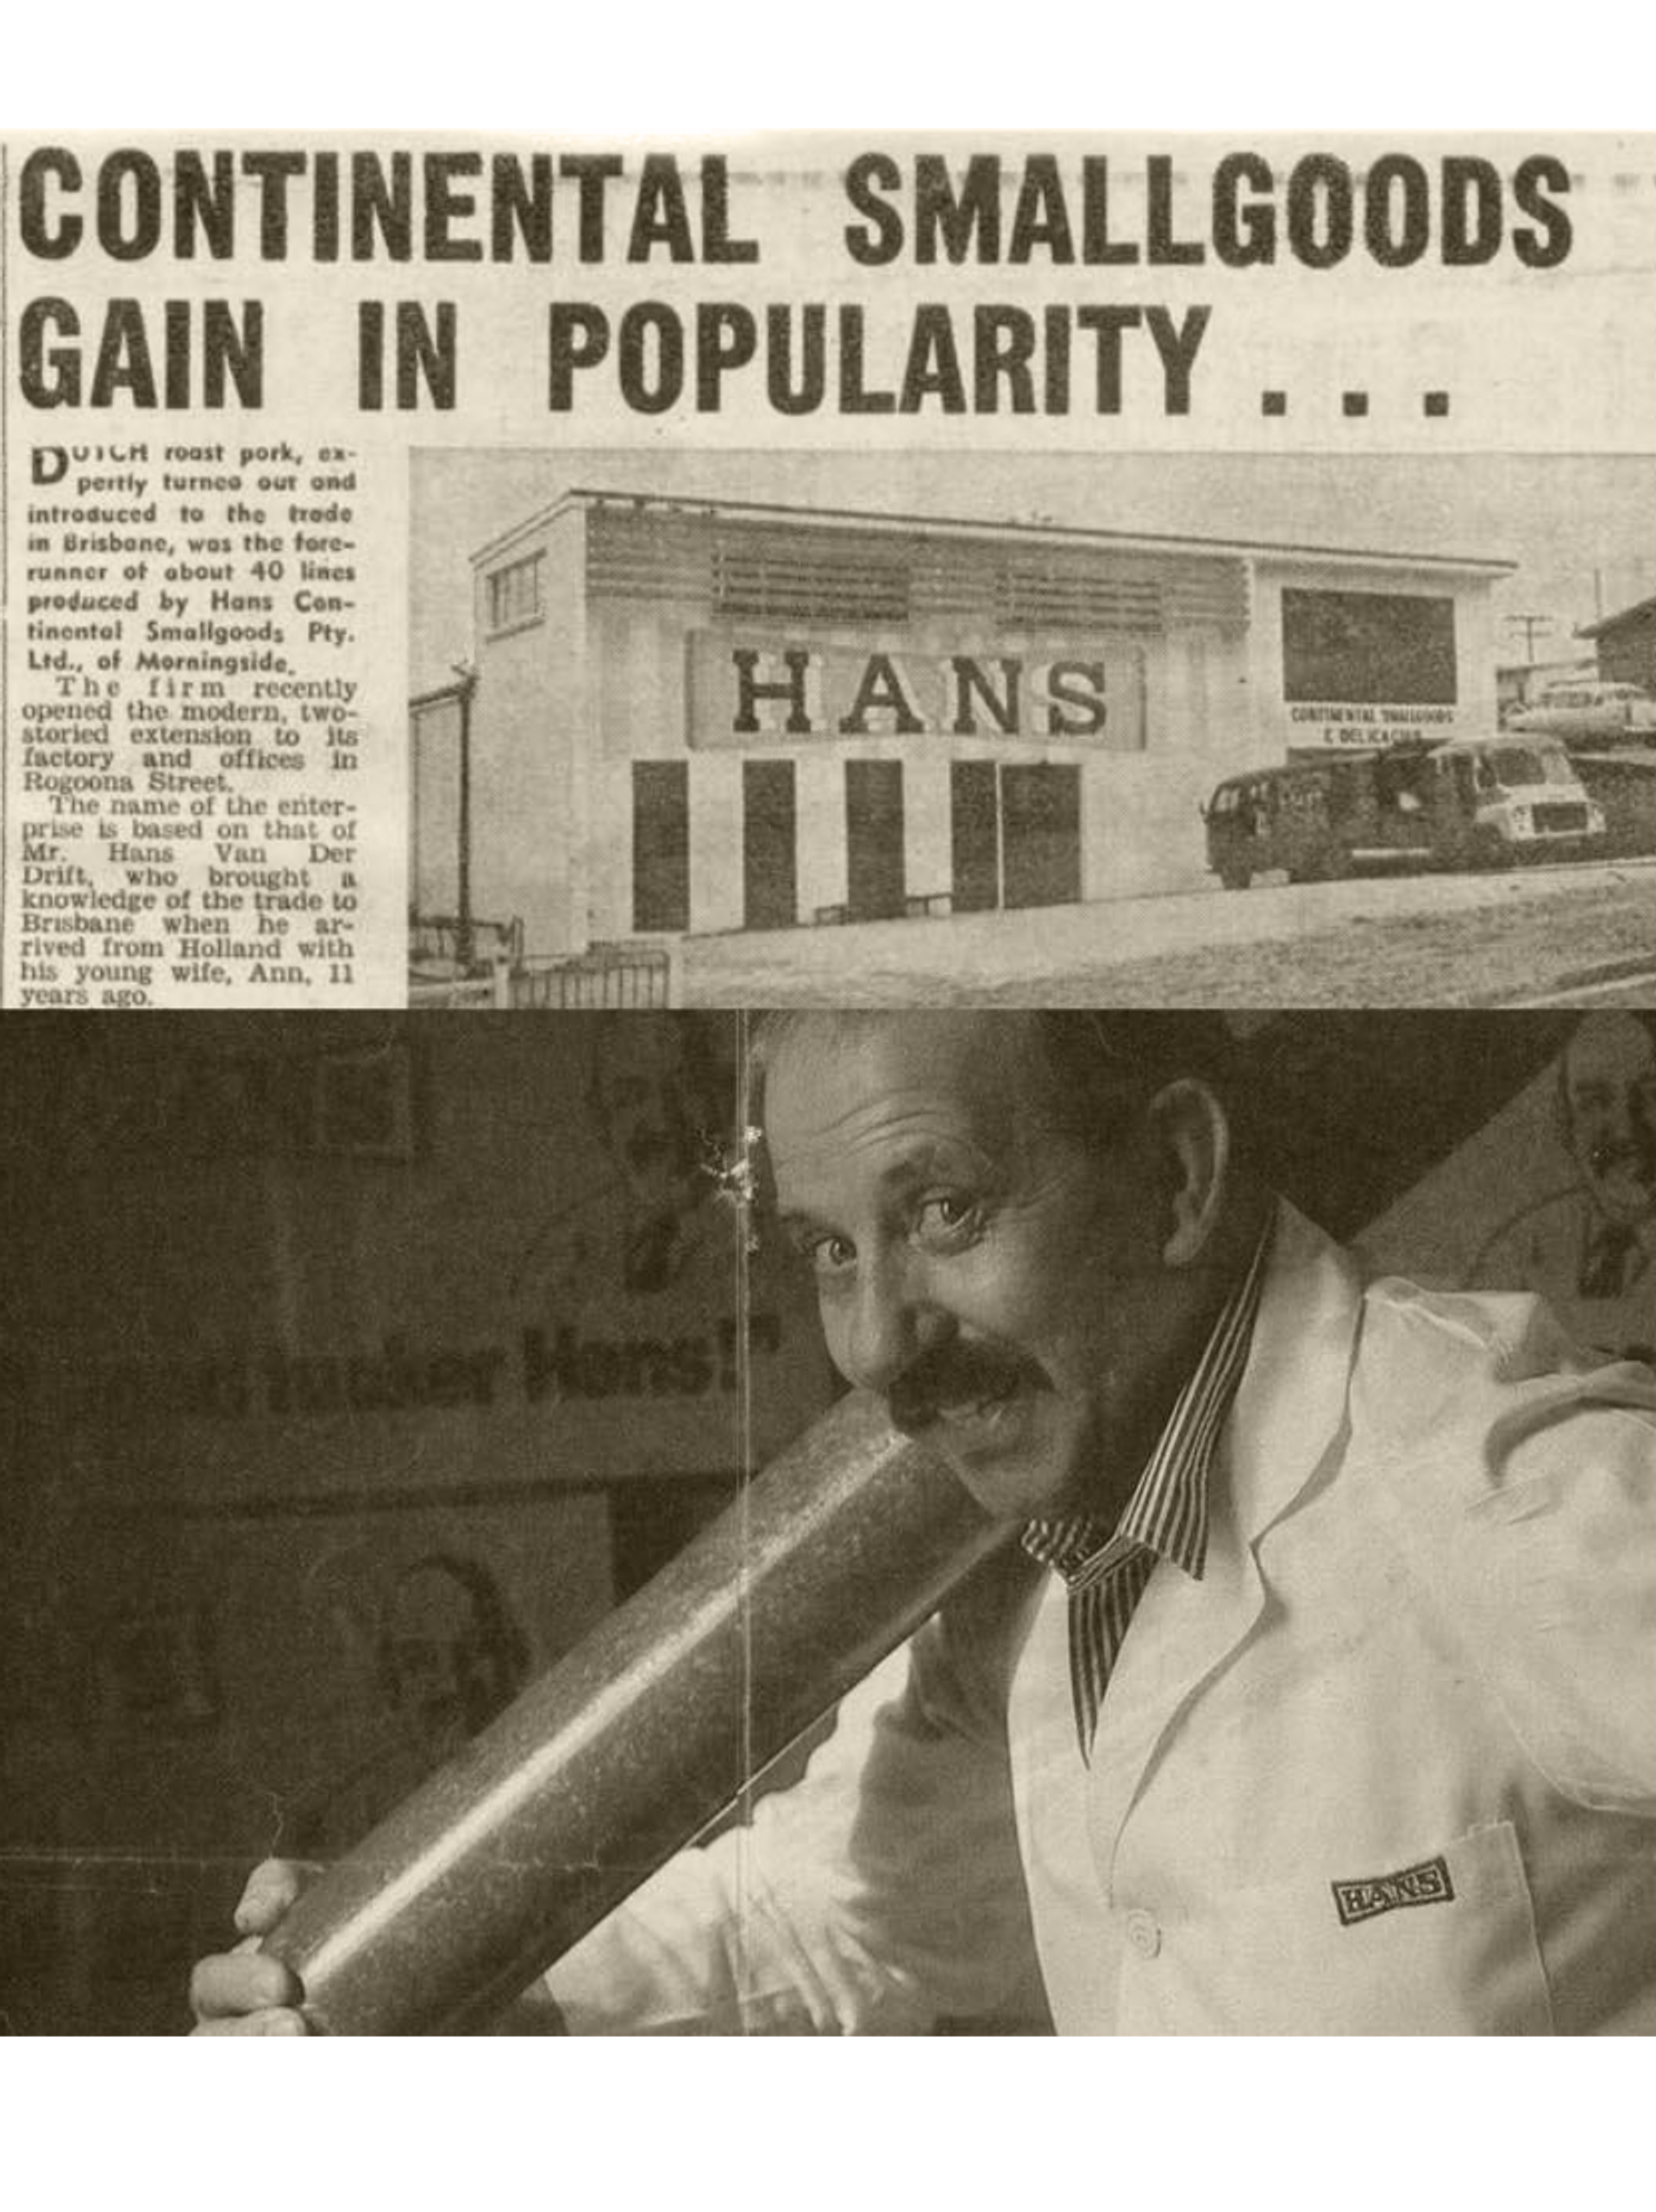 Archival newspaper article with headline “Continental Smallgoods Gain in Popularity” featuring black and white photograph of the founder of the meat brand Hans